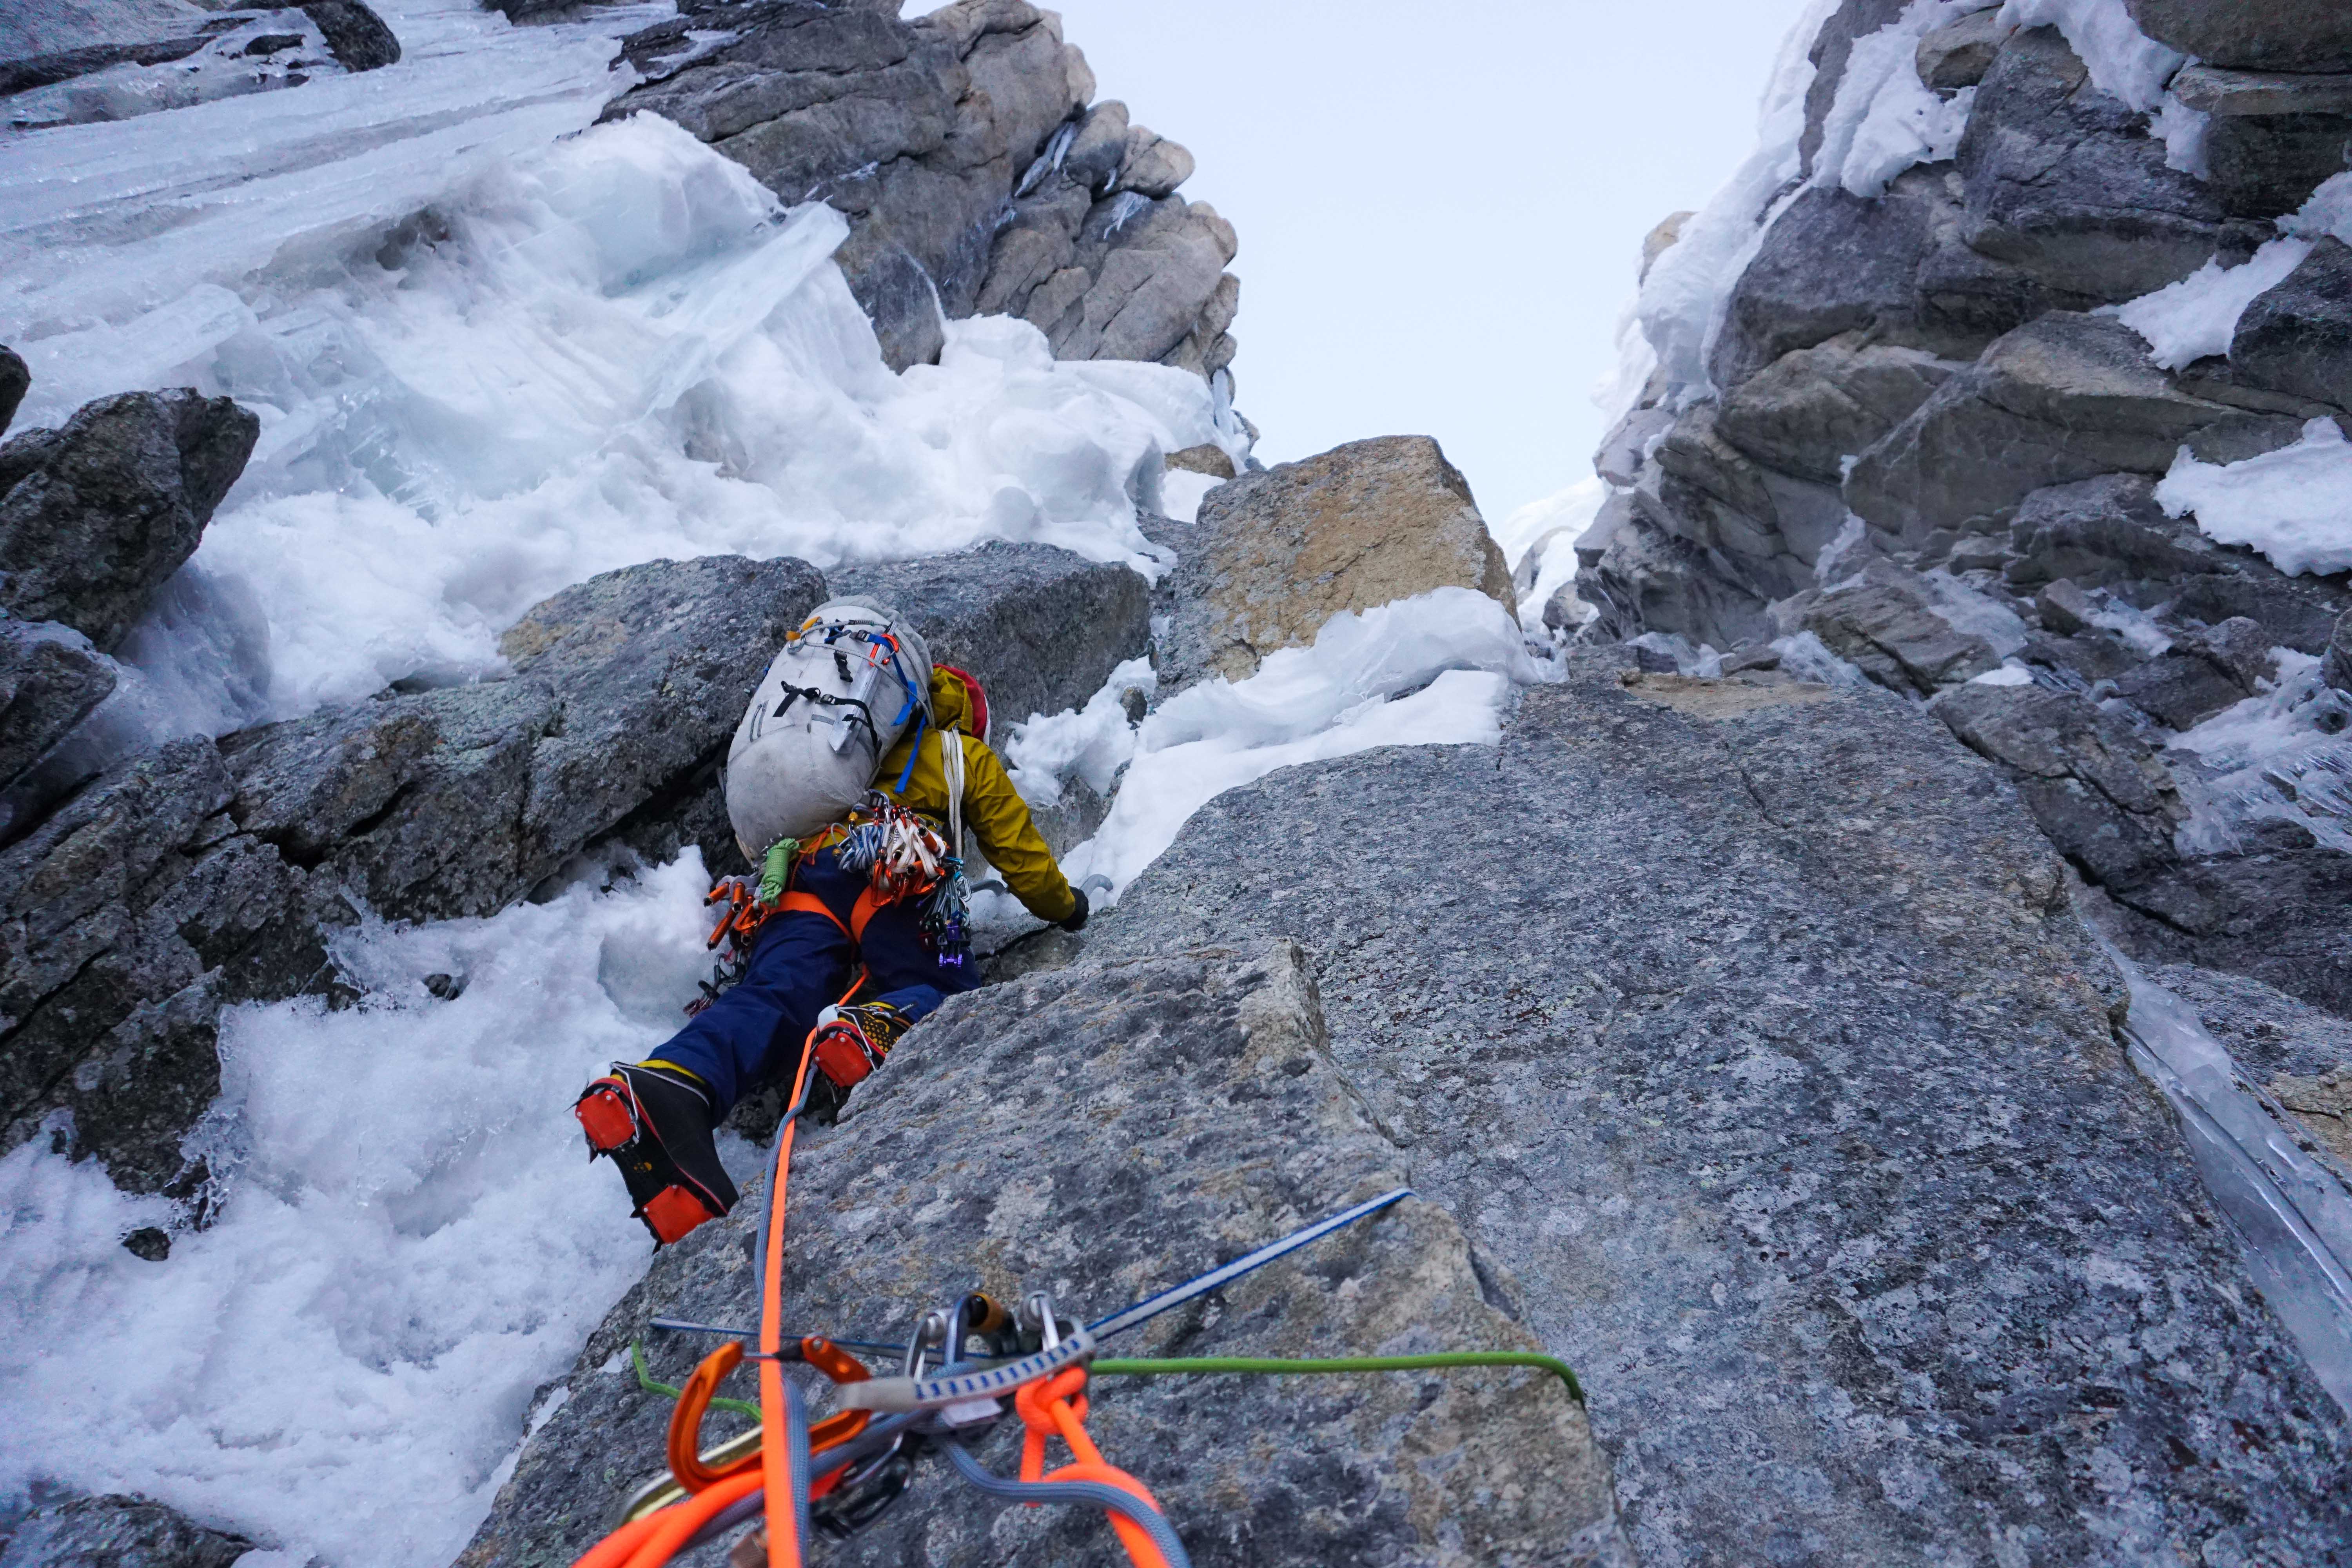 Wright launching into the lower mixed crux at the start of the first night on route